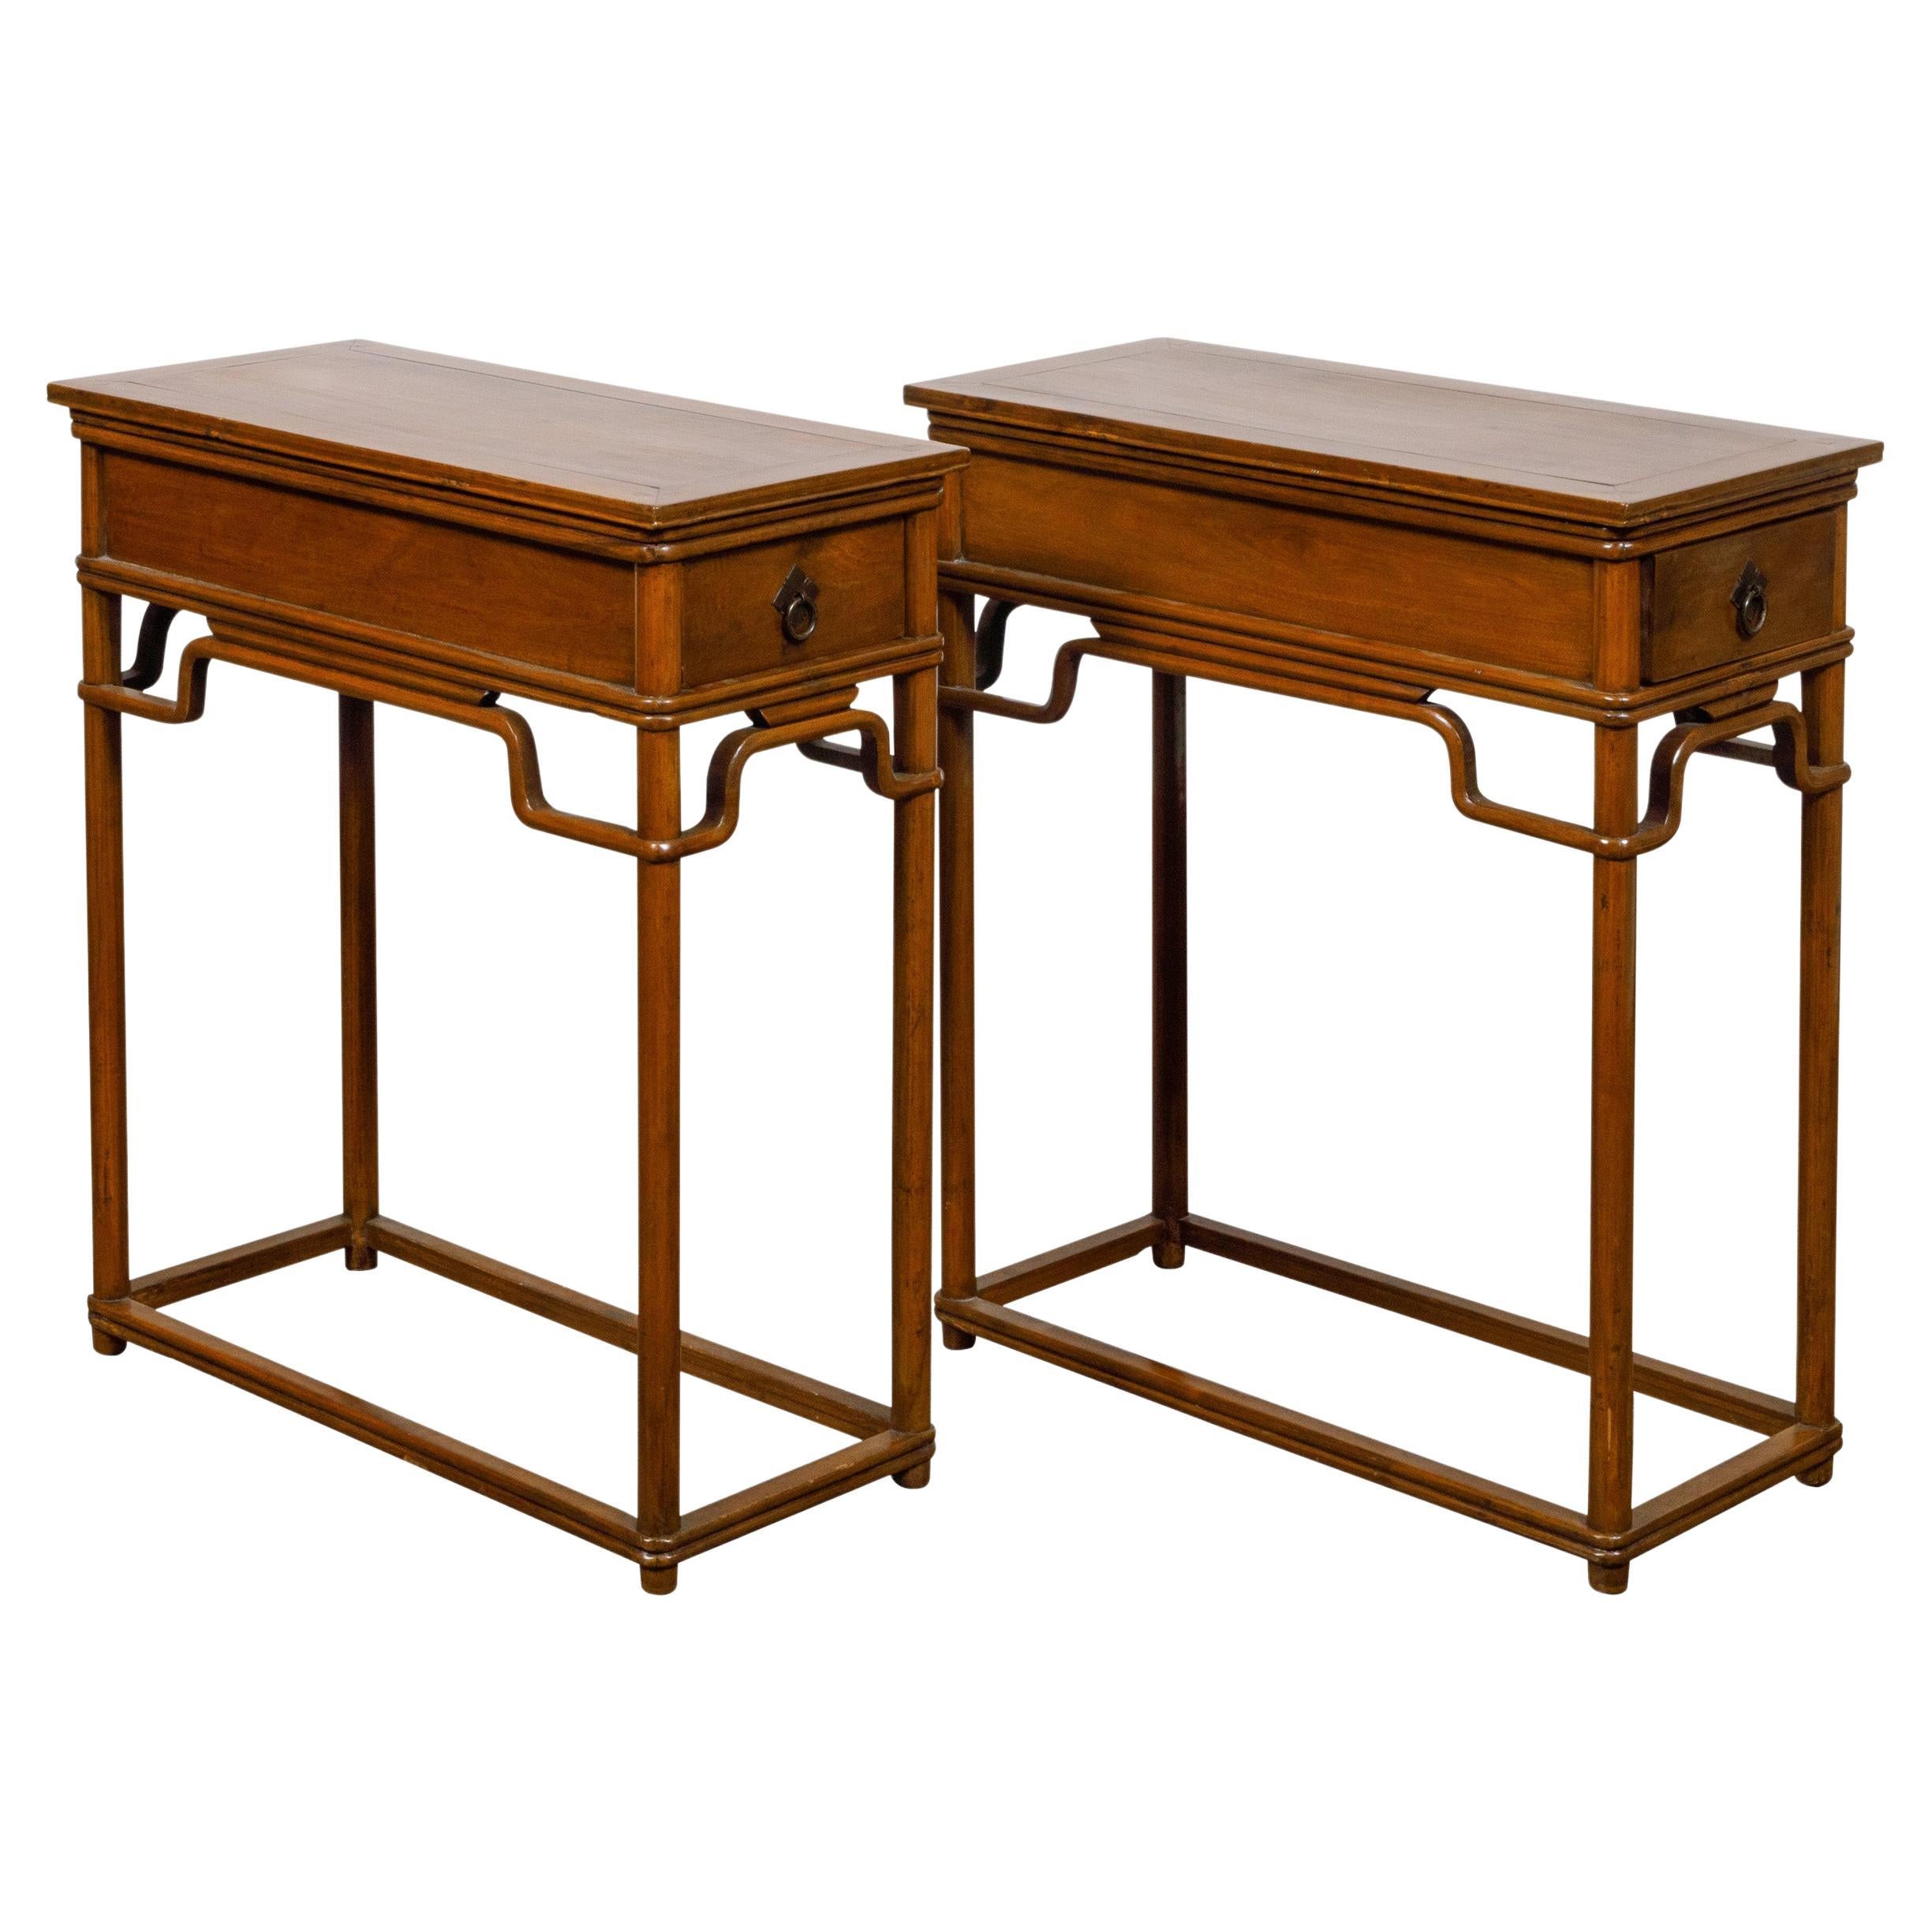 Pair of Teak 19th Century Console Tables with Drawers and Humpback Stretchers For Sale